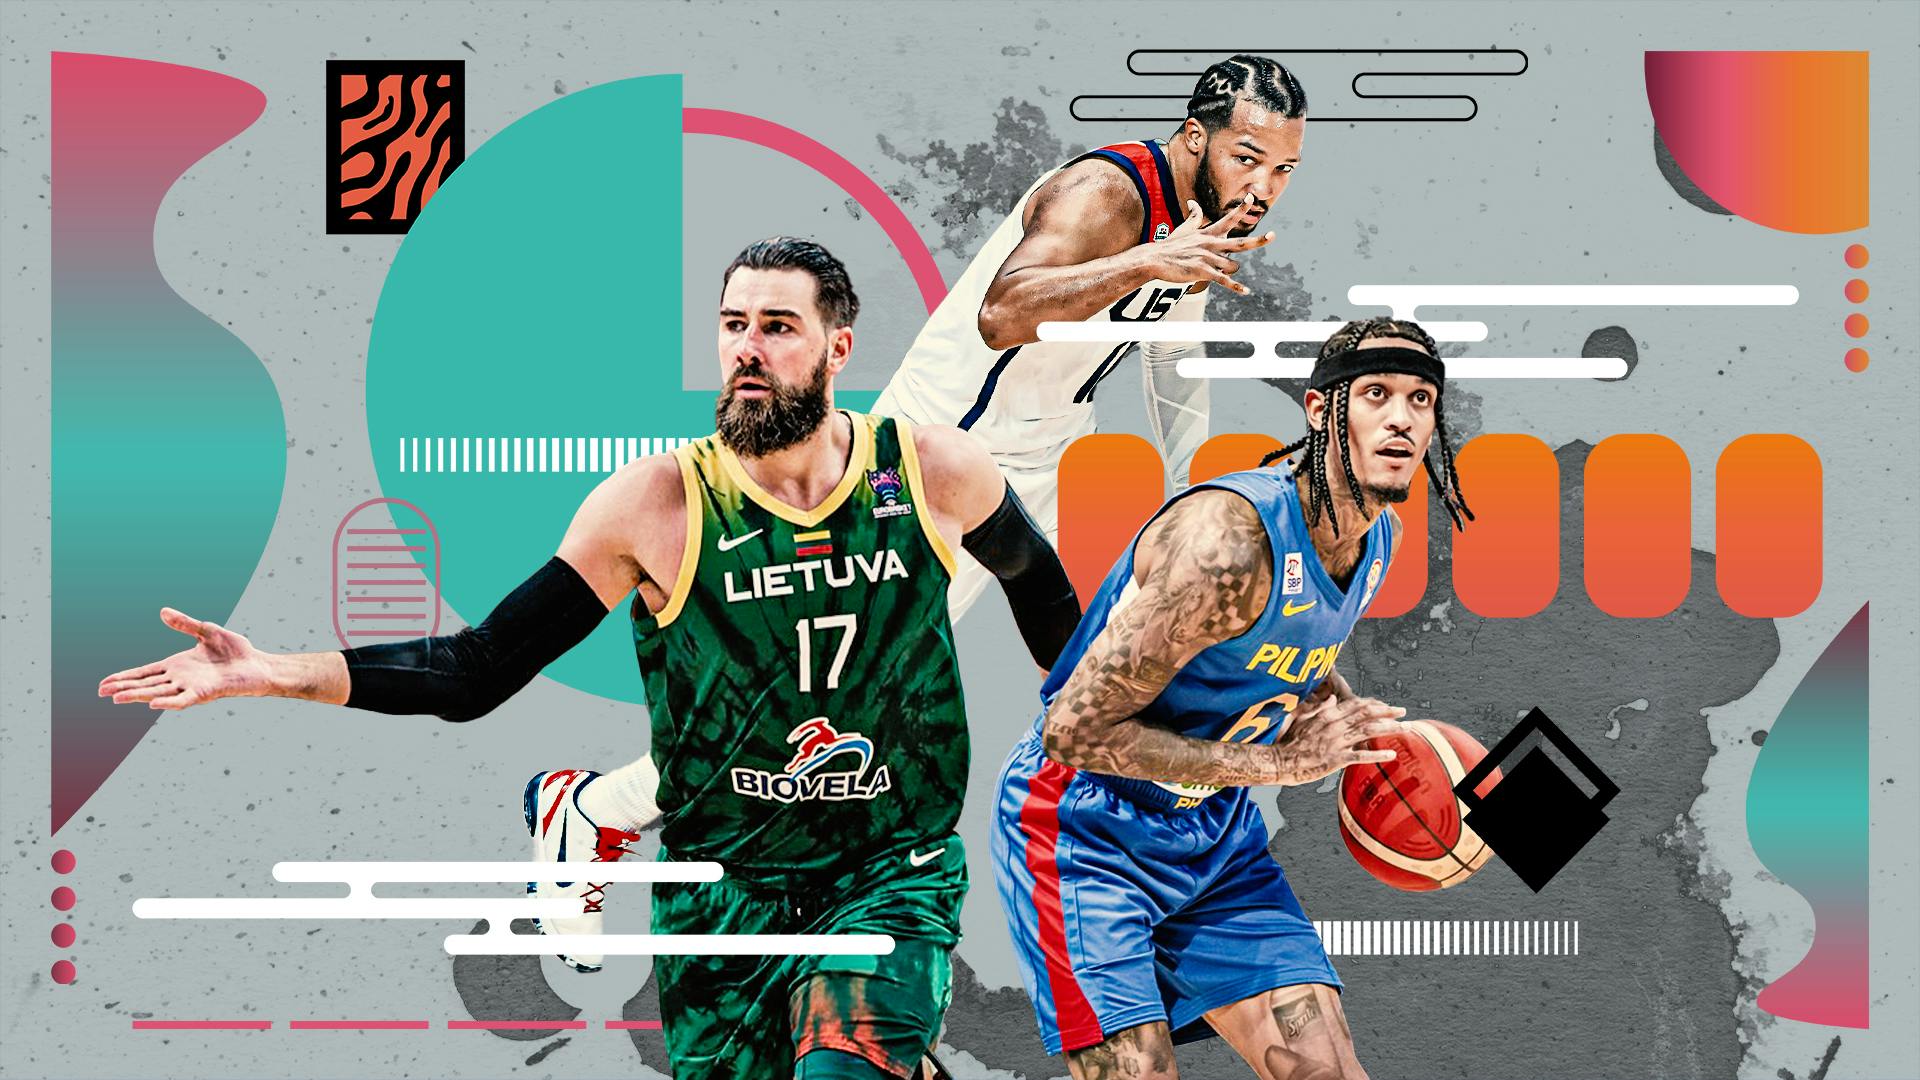 Players to watch in FIBA World Cup: Manila Edition